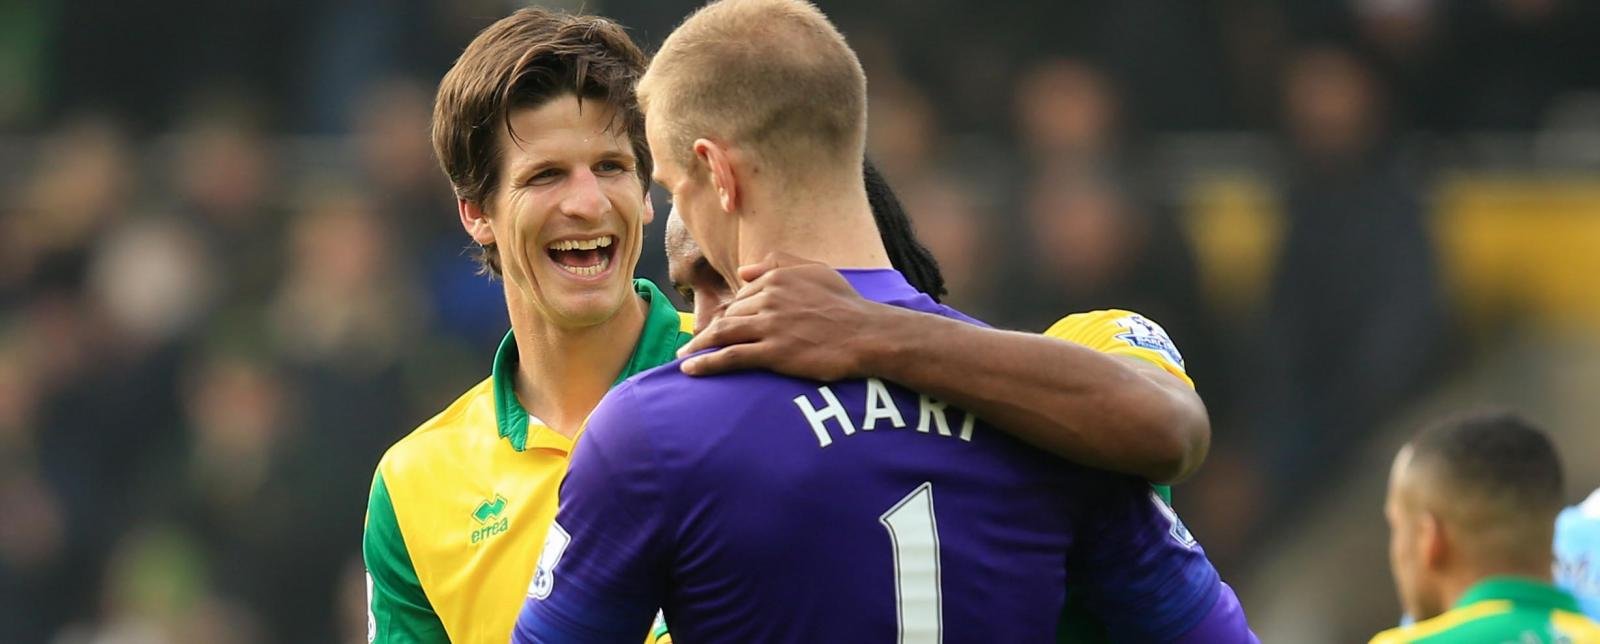 3 things we learnt from Norwich City’s 2015/16 season